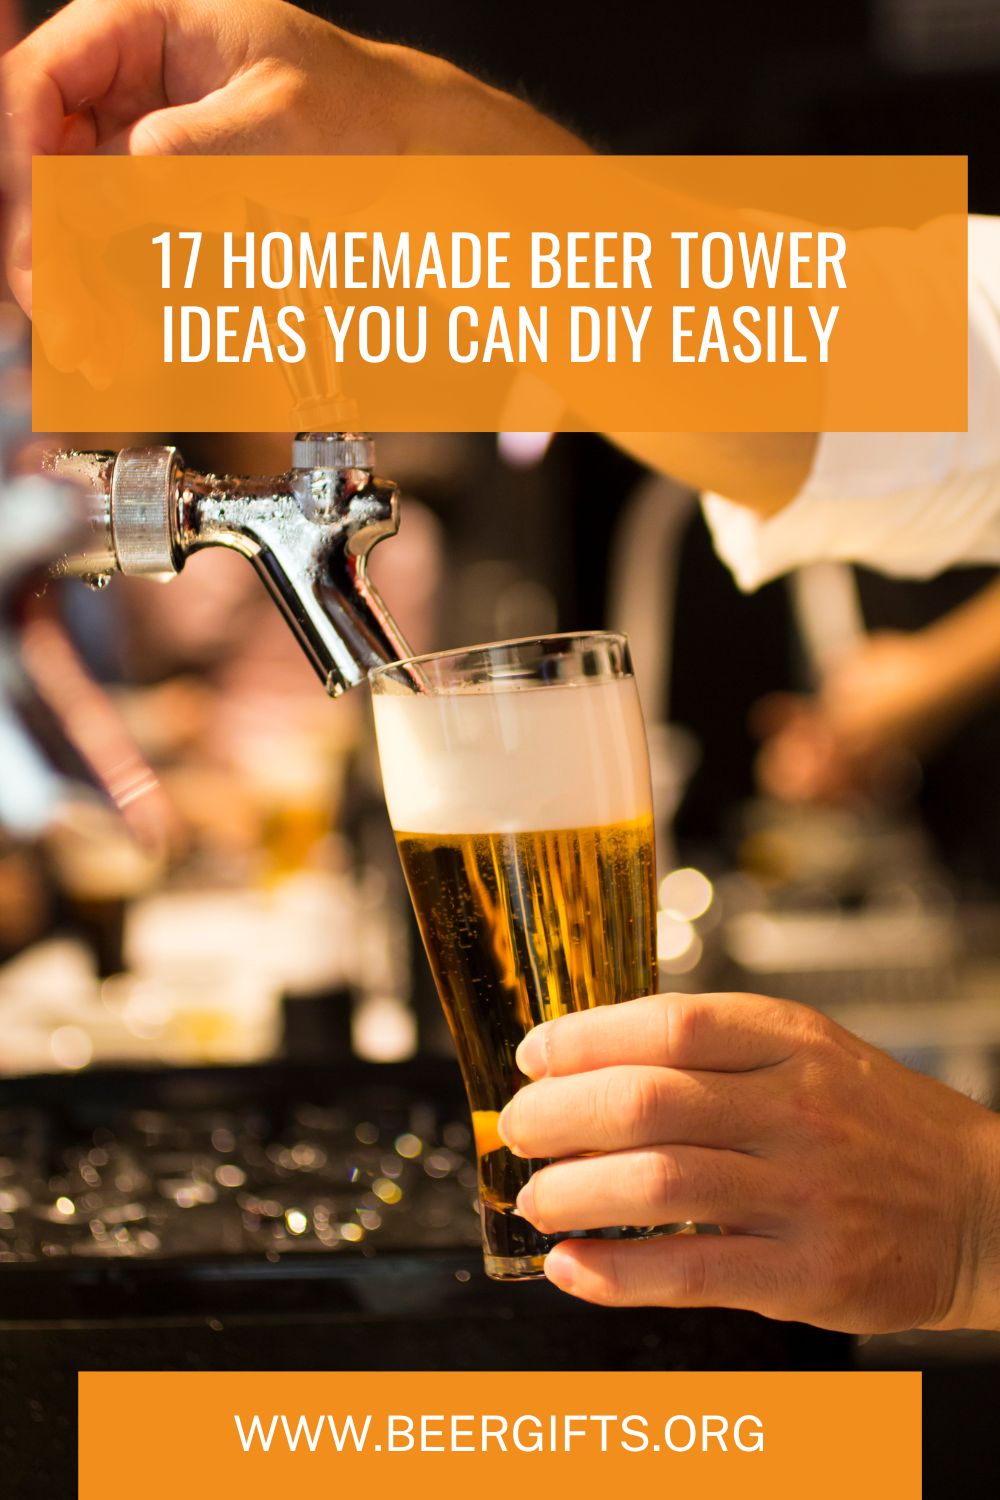 17 Homemade Beer Tower Ideas You Can DIY Easily1